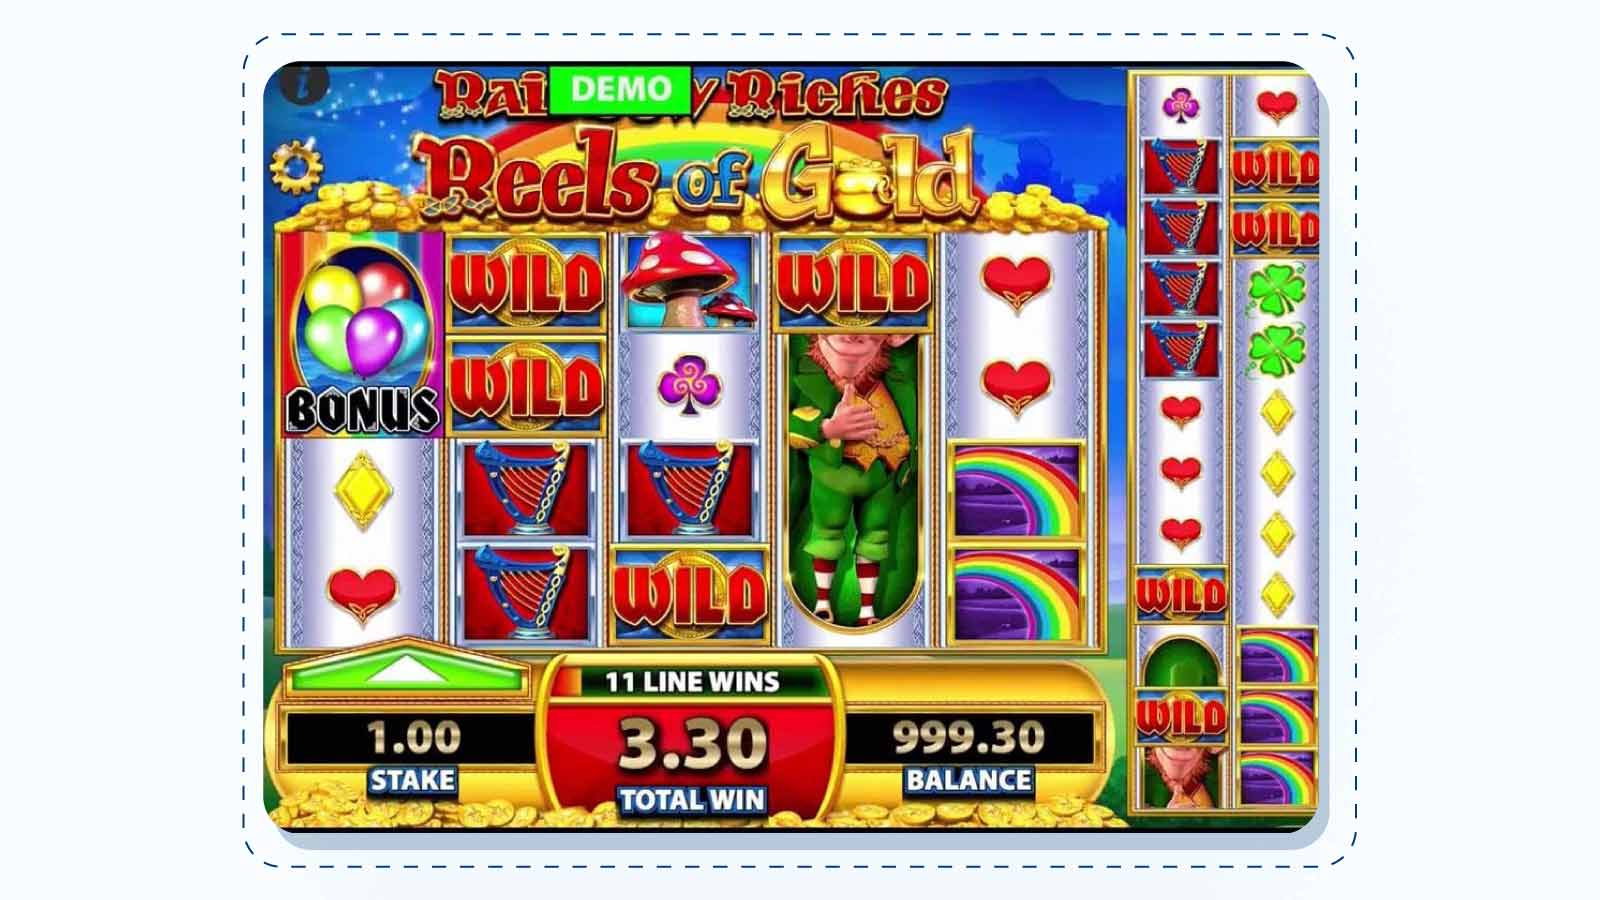 Rainbow Riches Reels of Gold Barcrest – RTP 98% – SG Gaming